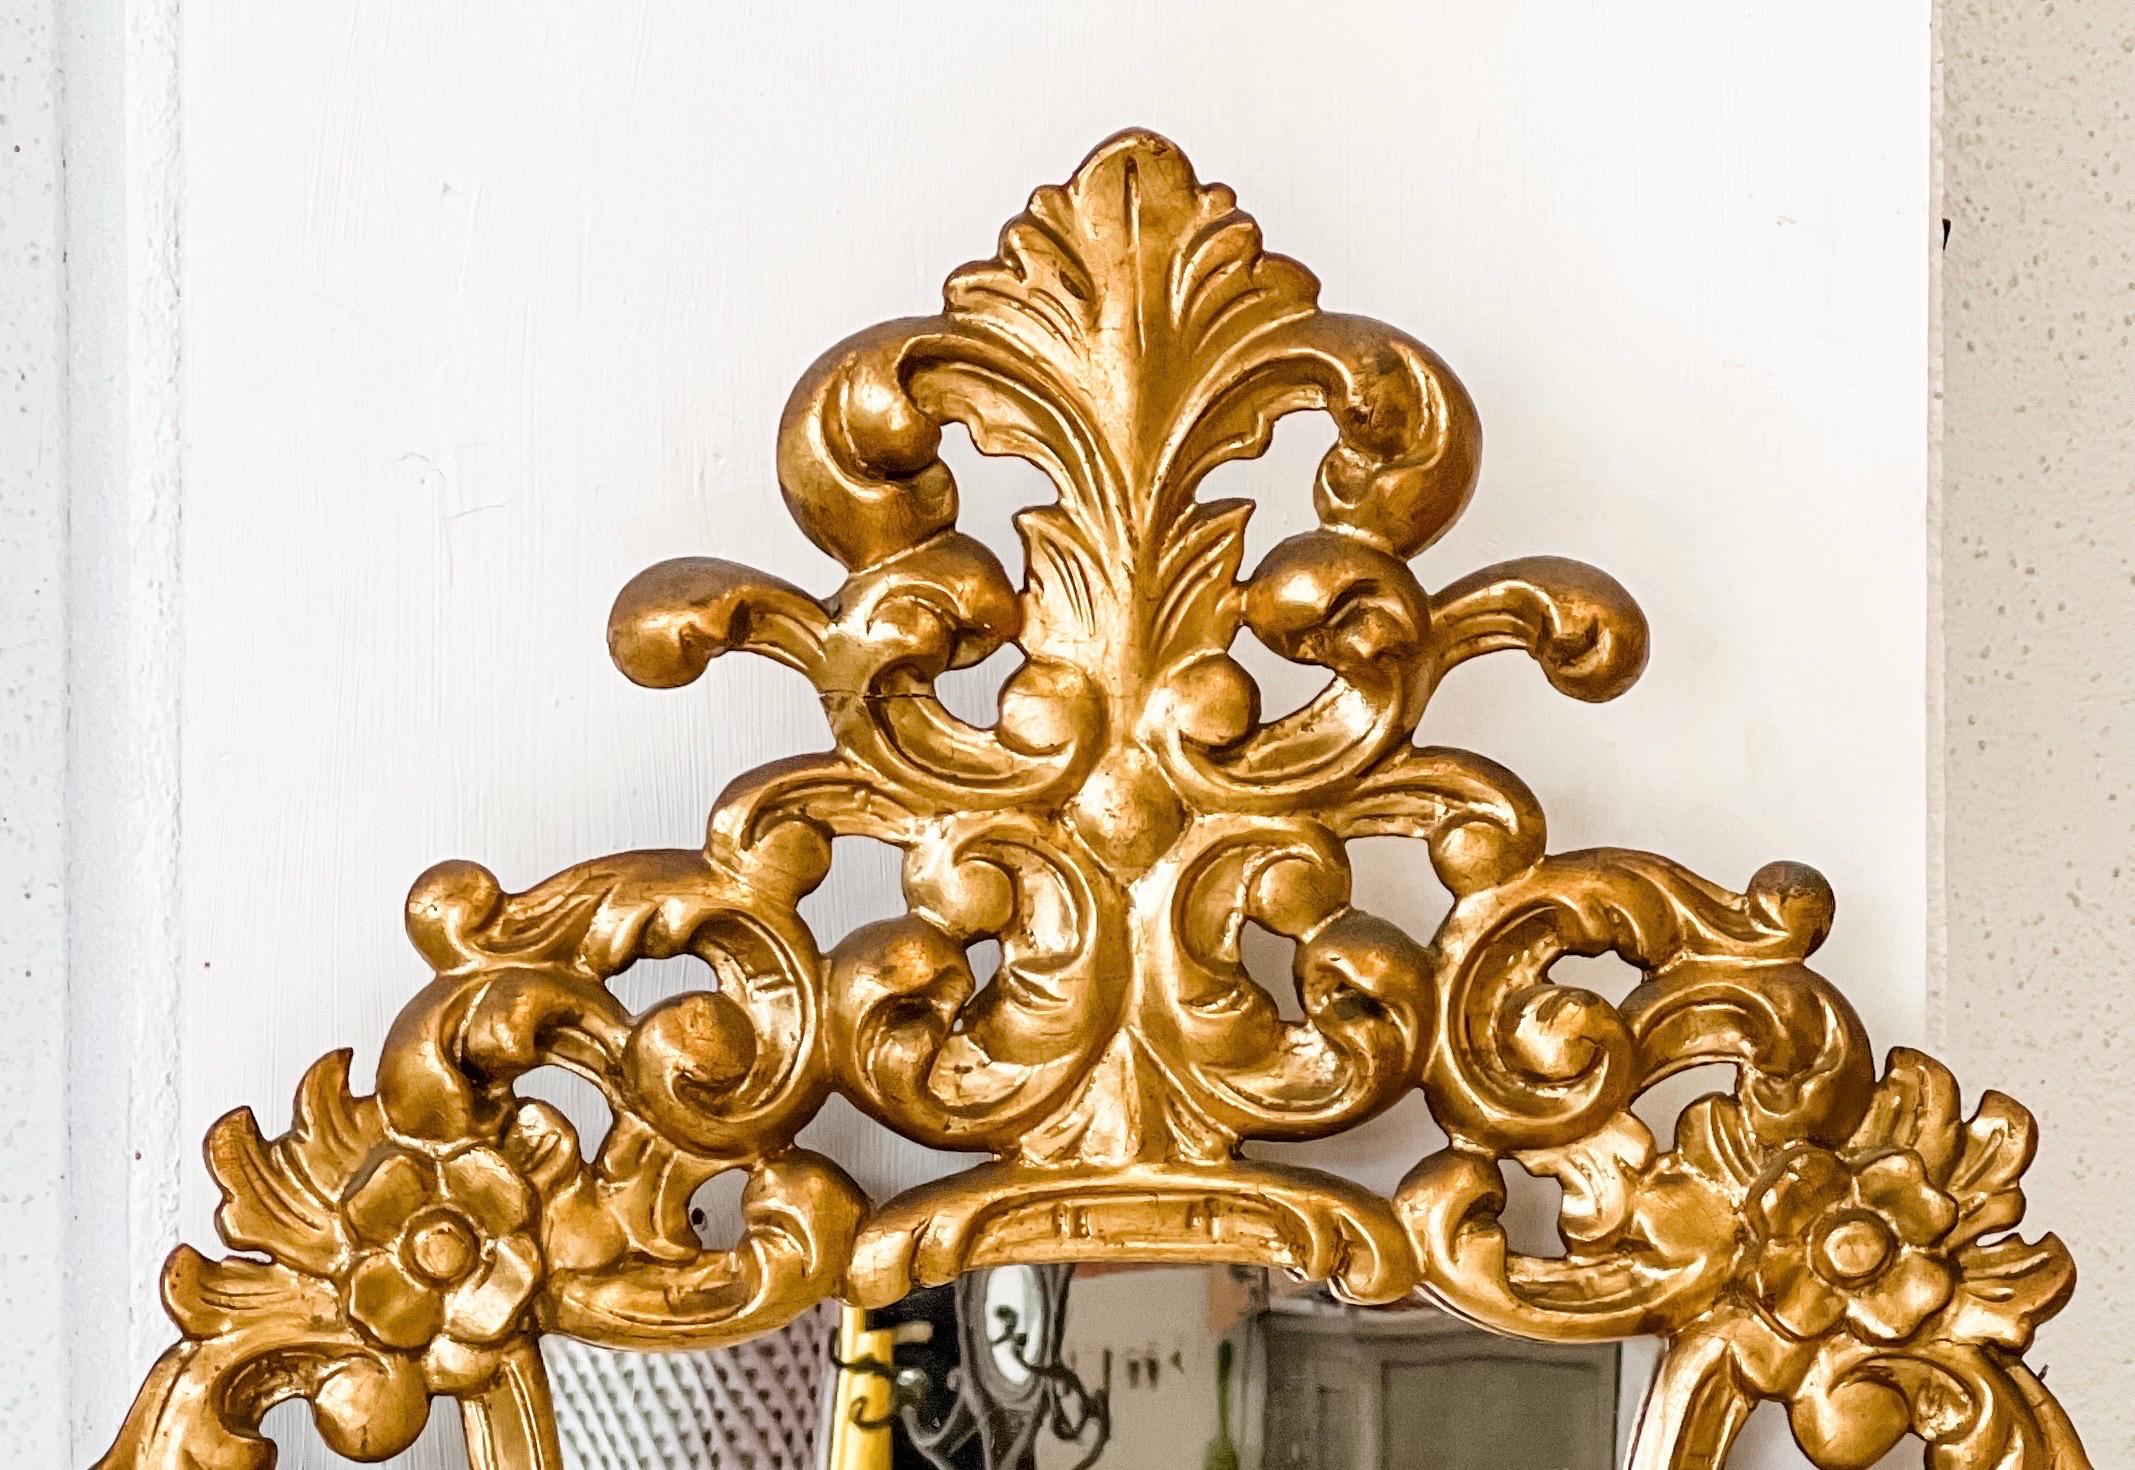 Antique French mirror with lovely floral gold gilt detail discovered in France. Carved and scrolled floral detail and backed in wood, this piece would be stunning as an accent mirror anywhere or in a powder room. Measures 33.8” in height and 20.5”